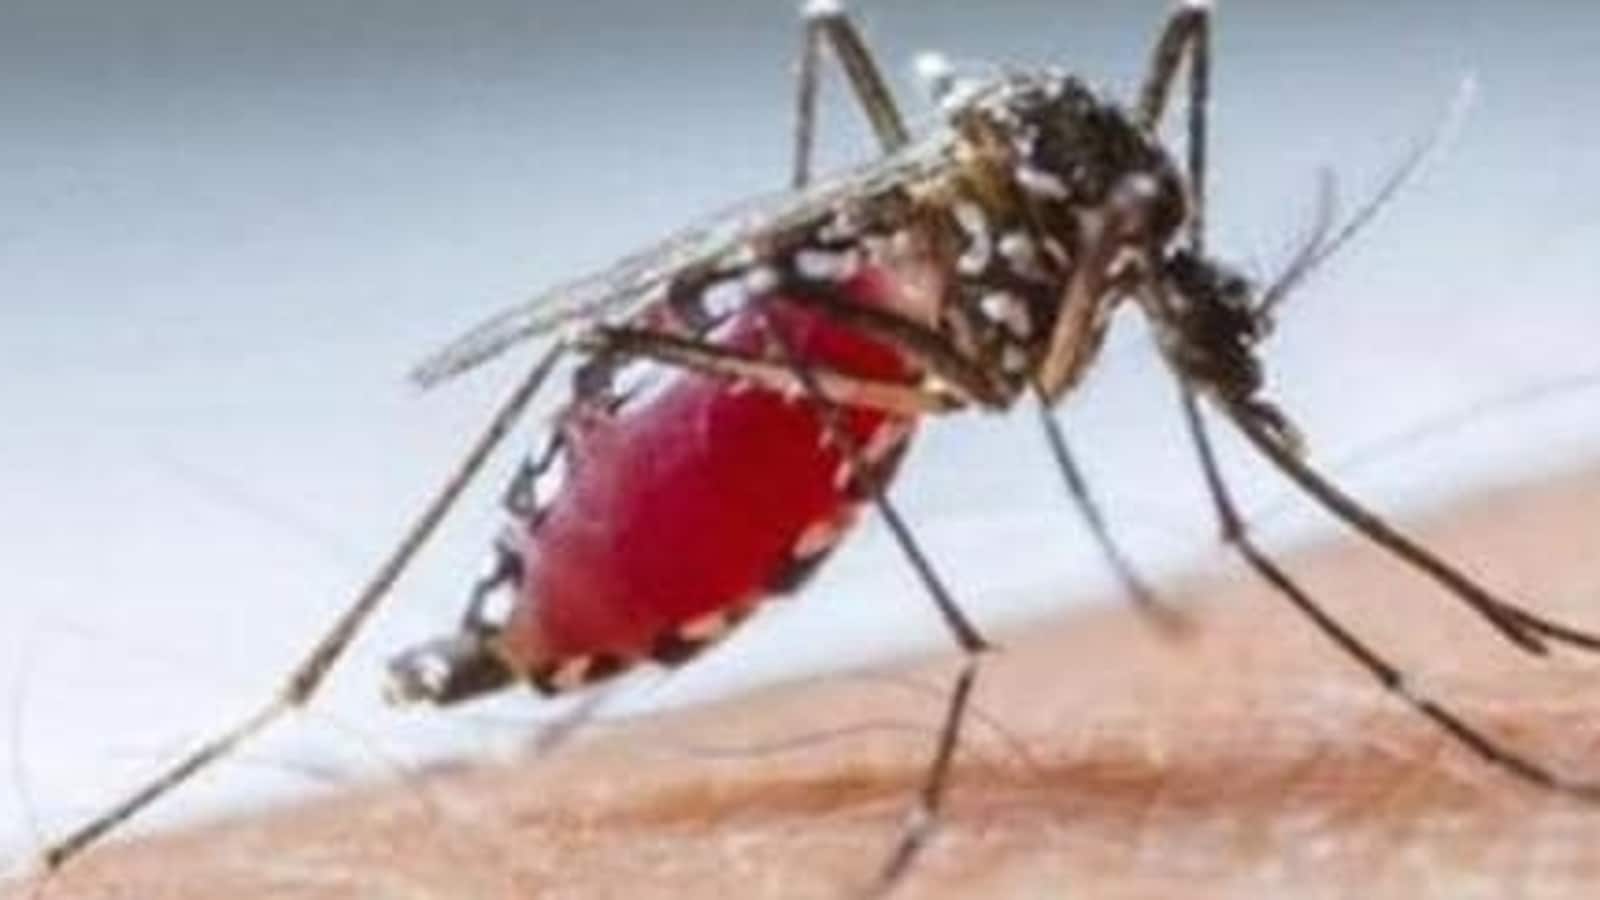 Cases of dengue, mosquito-borne diseases rising in Europe, EU health agency warns